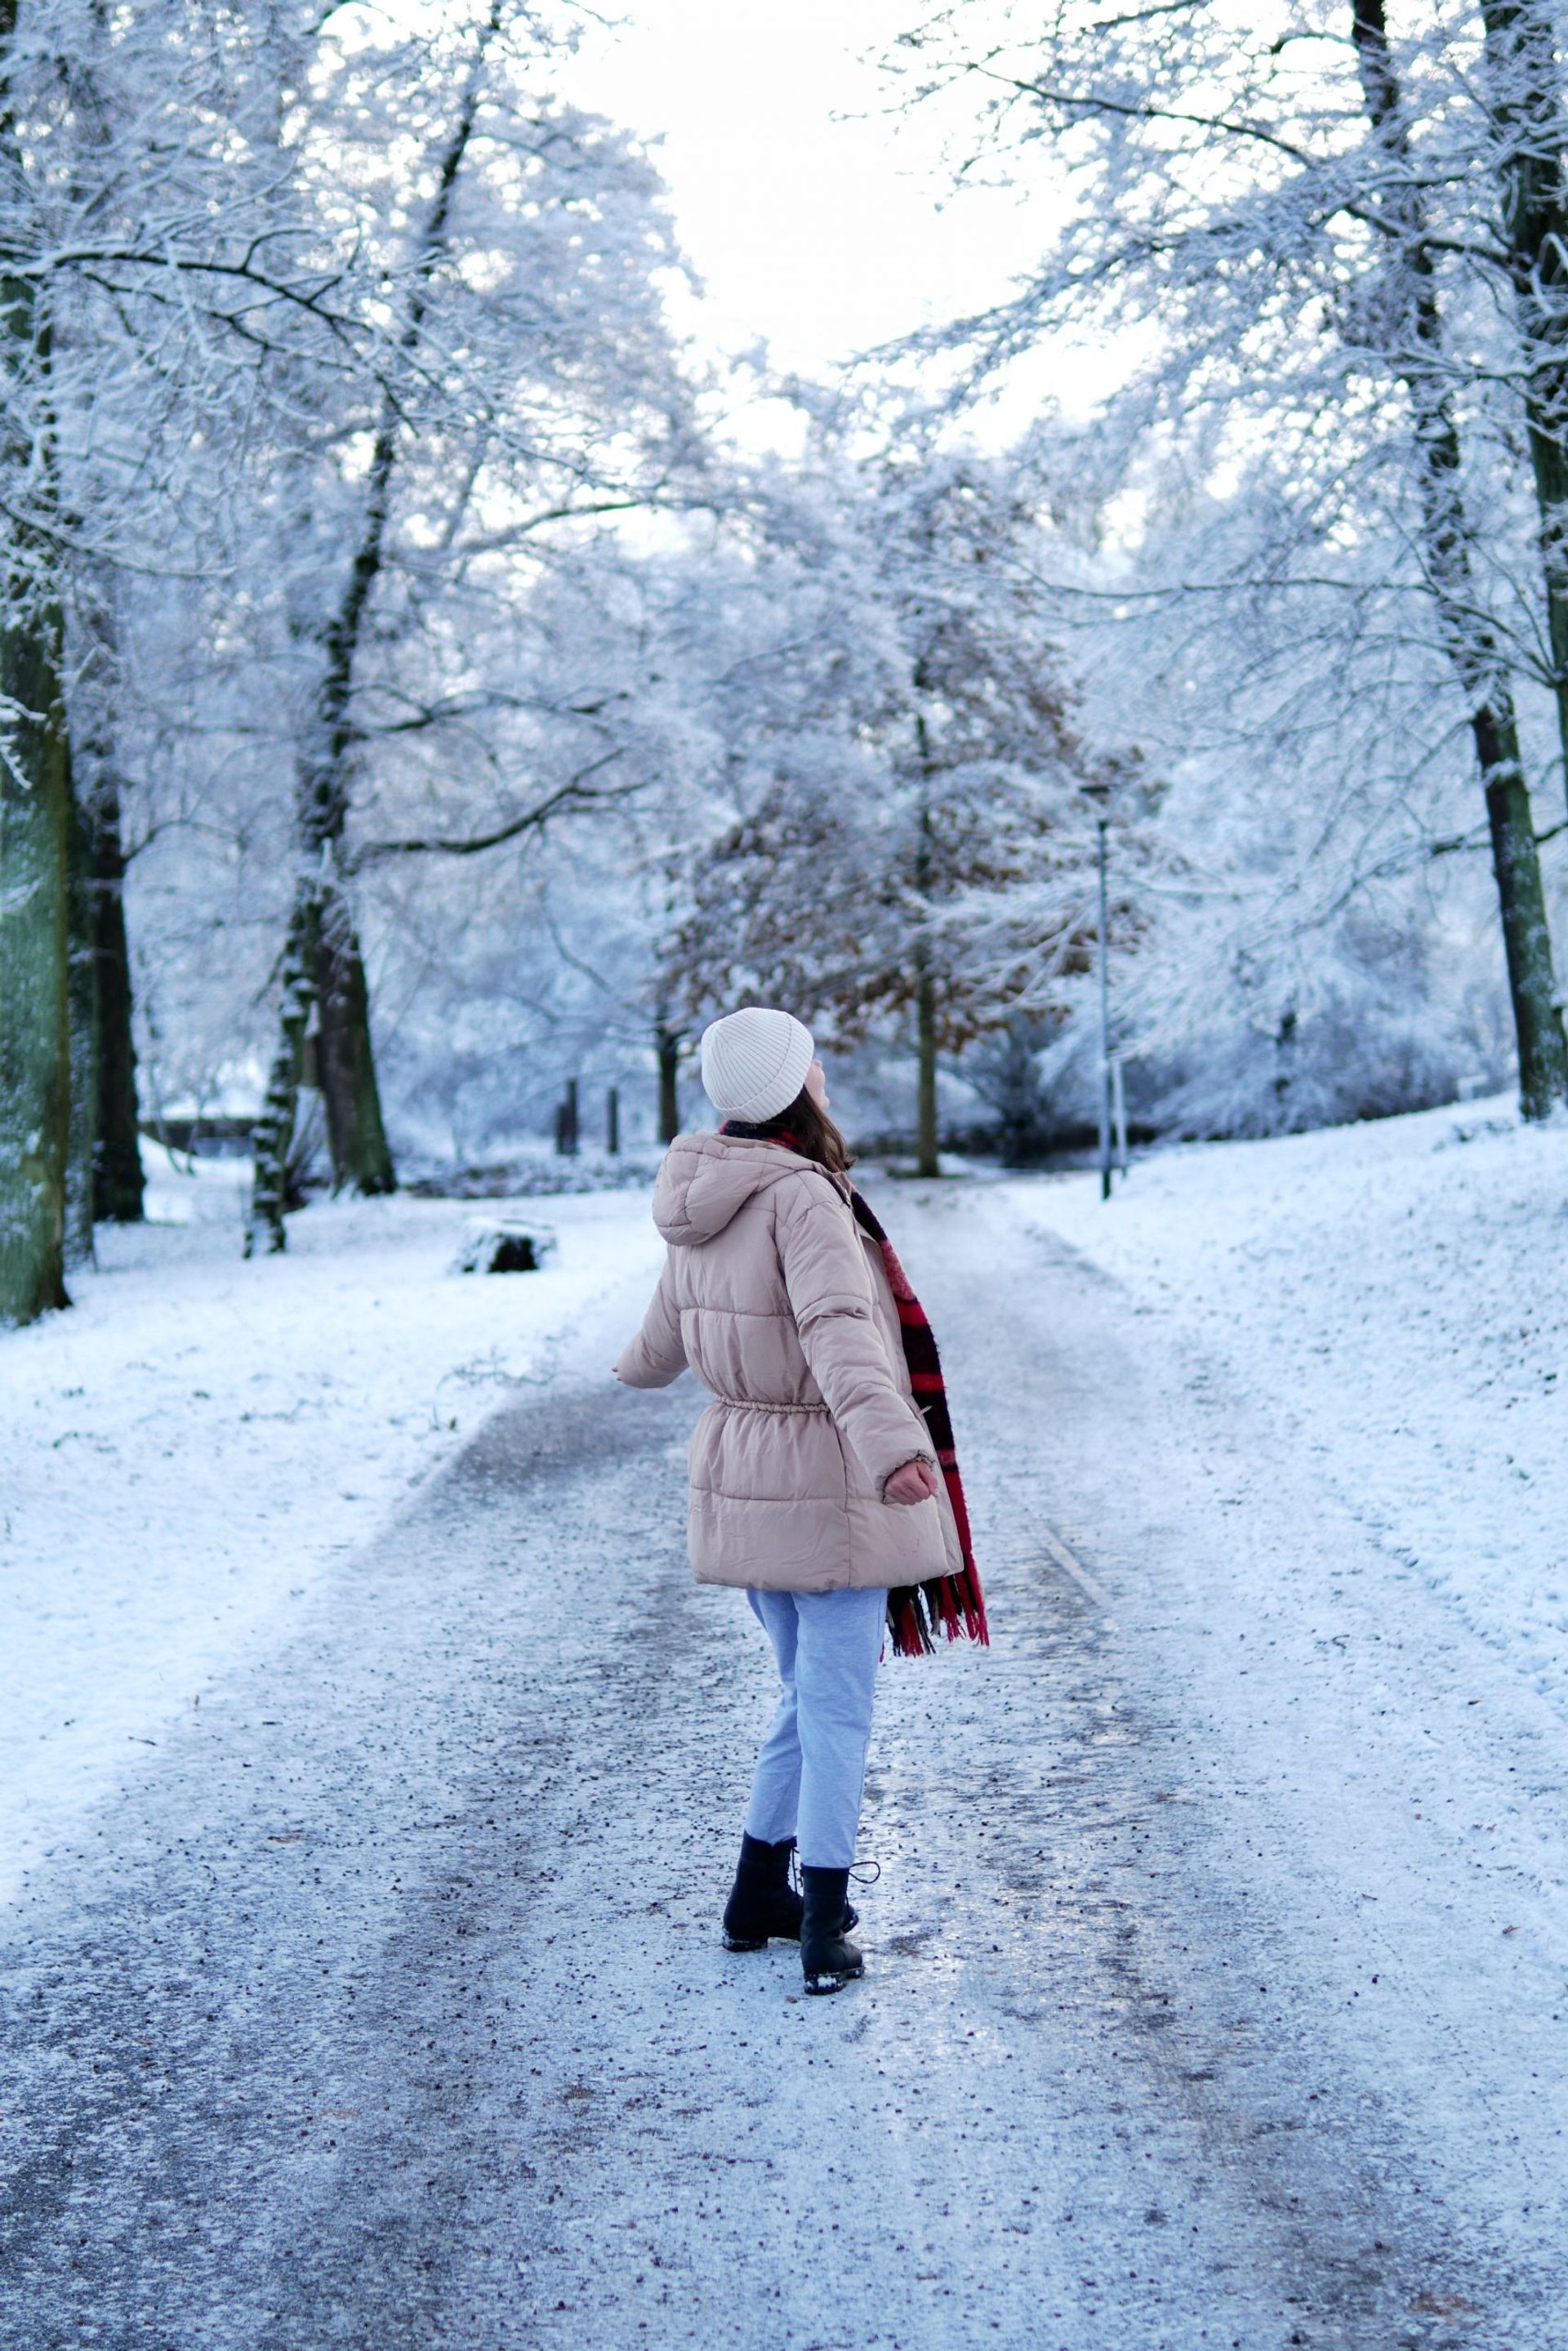 A girl facing away from the camera in a snowy park